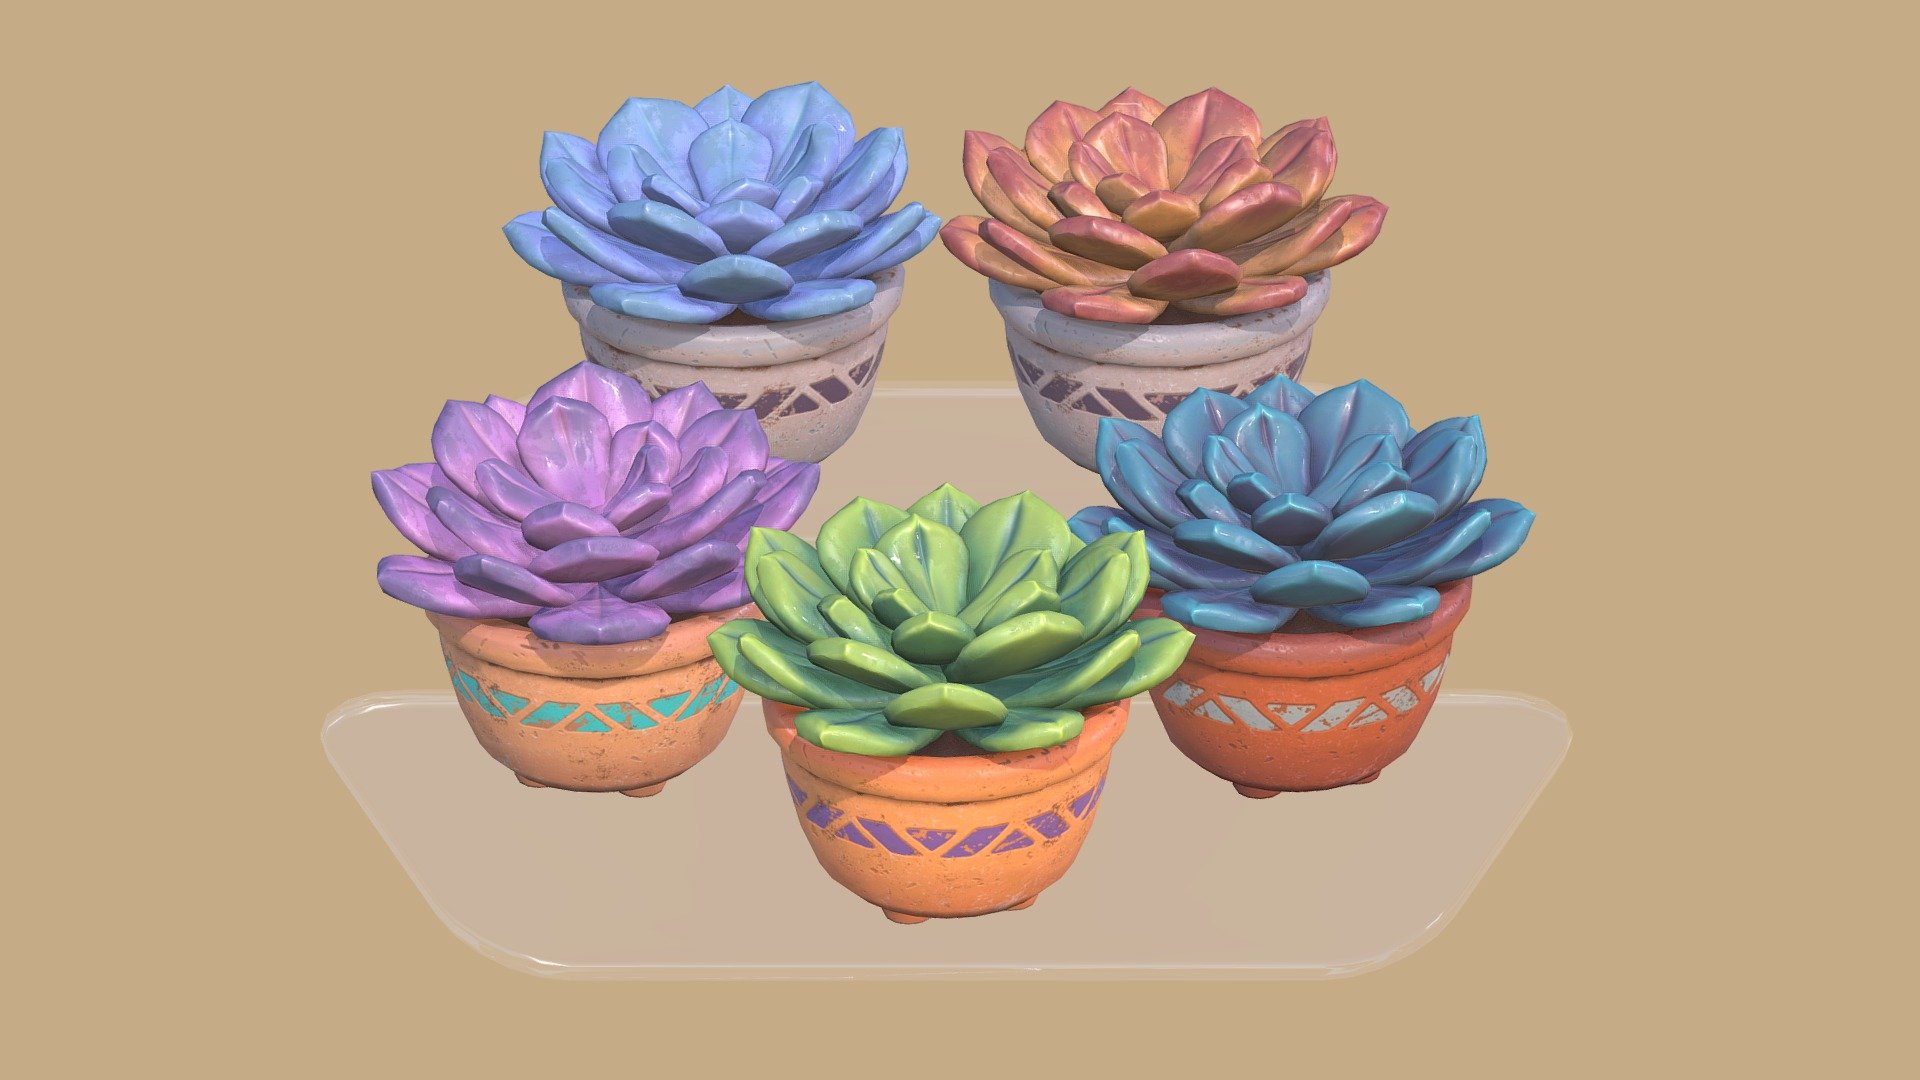 Just like buying succulents in real life, I thought I'd give my previous model some friends ☀️ - Pack of Succulents - 3D model by maddhattpatt (@maddhatt) 3d model